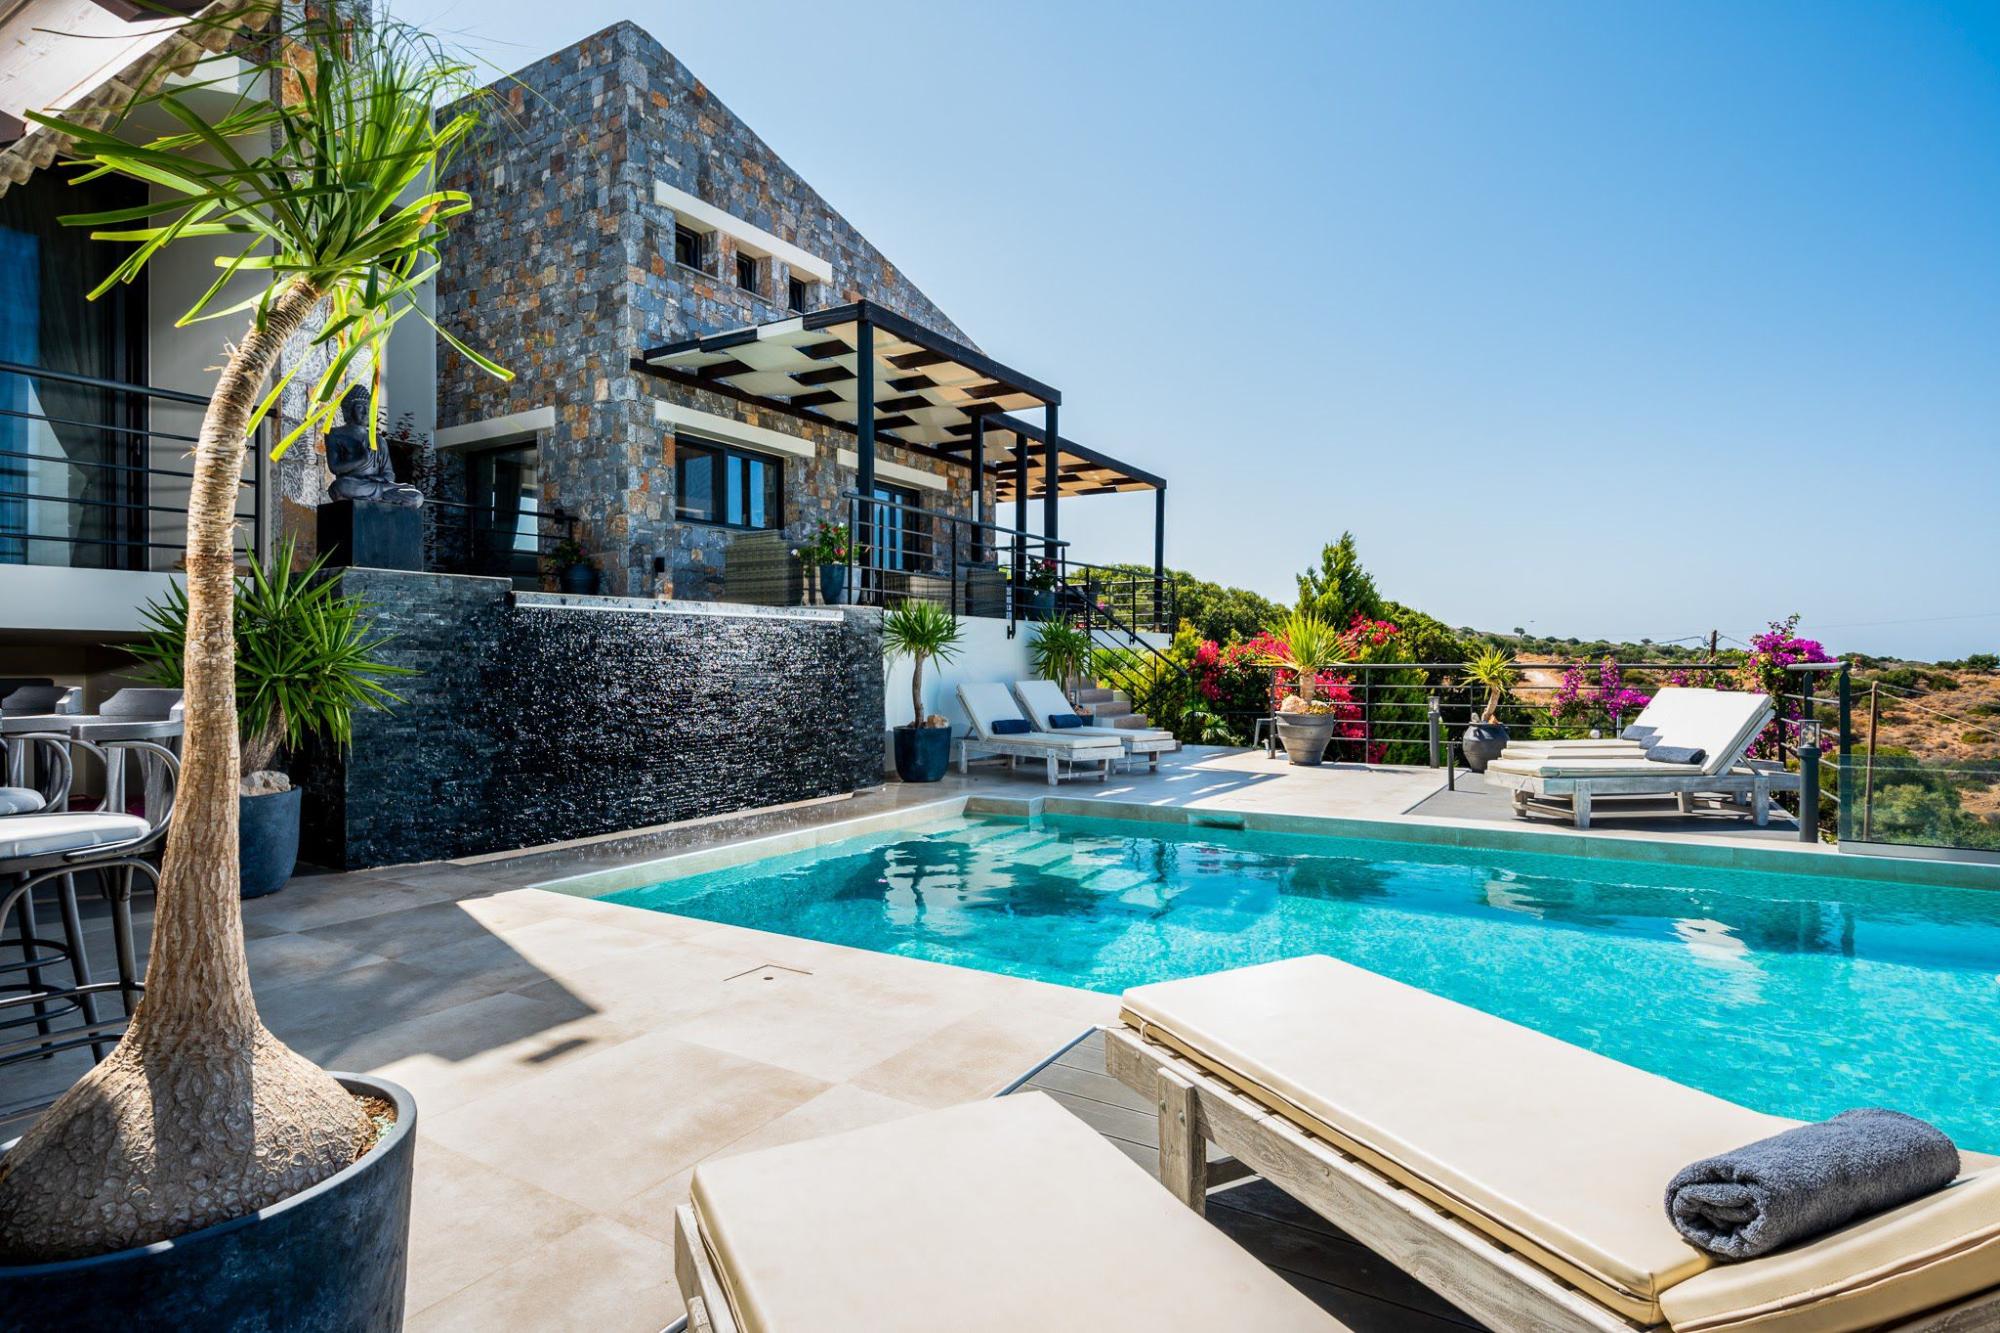 Stone-built modern villa with swimming pool and stunning views.